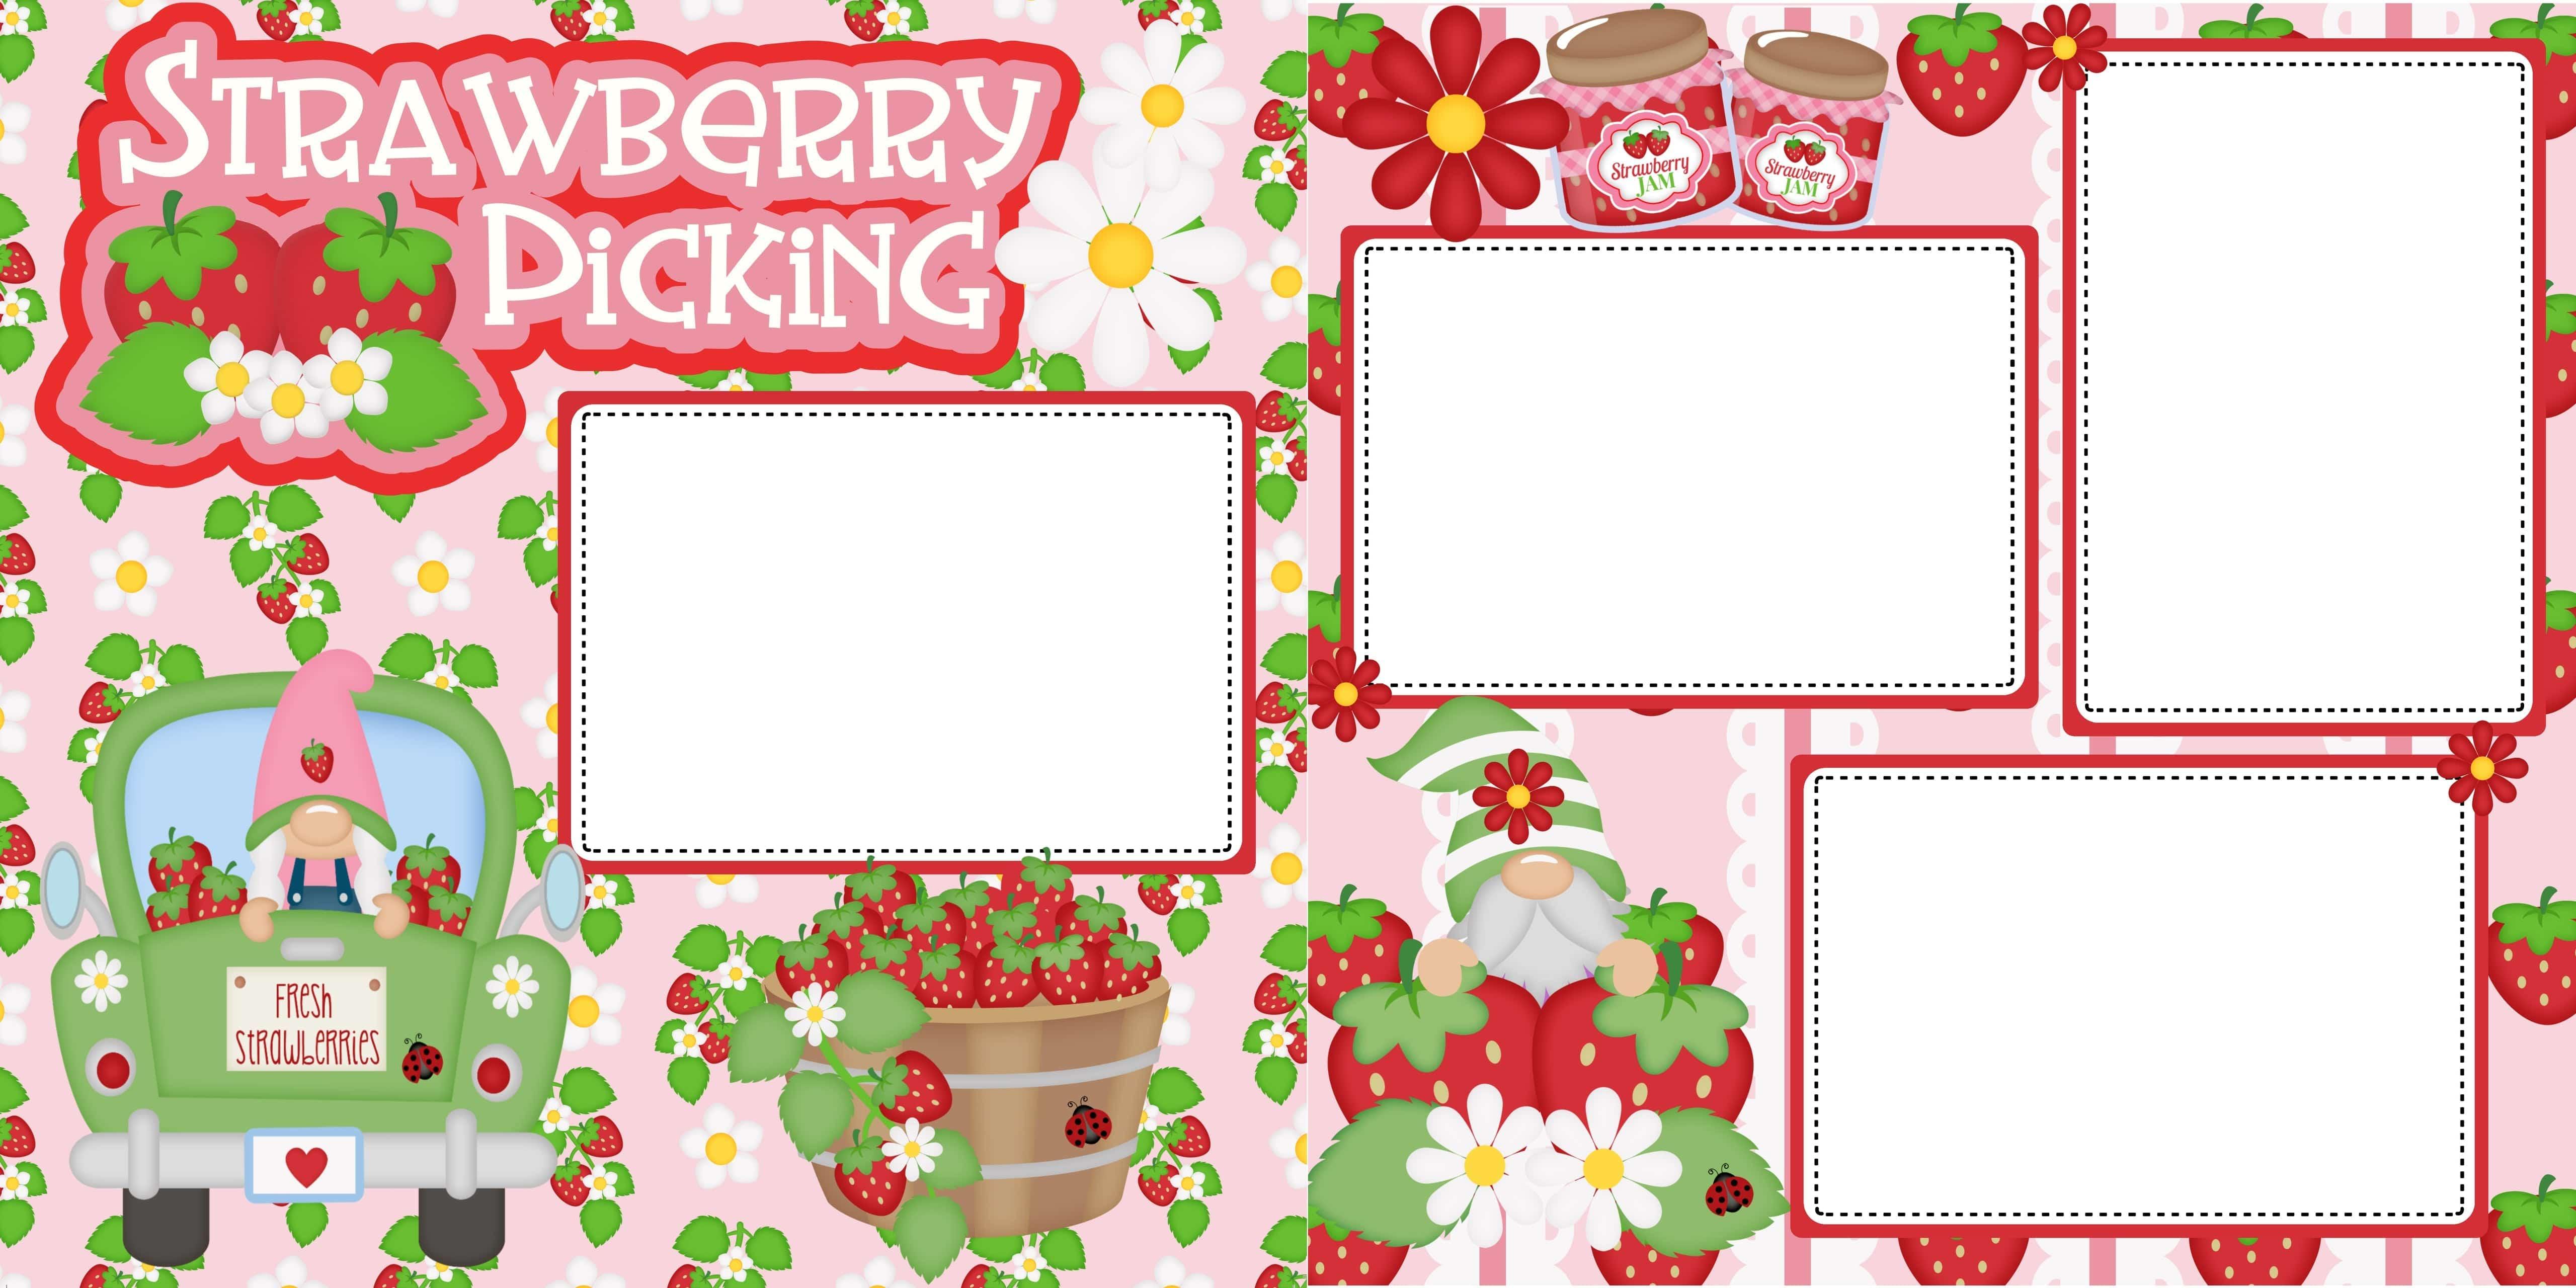 Gnomes Picking Strawberries (2) - 12 x 12 Premade, Printed Scrapbook Pages by SSC Designs